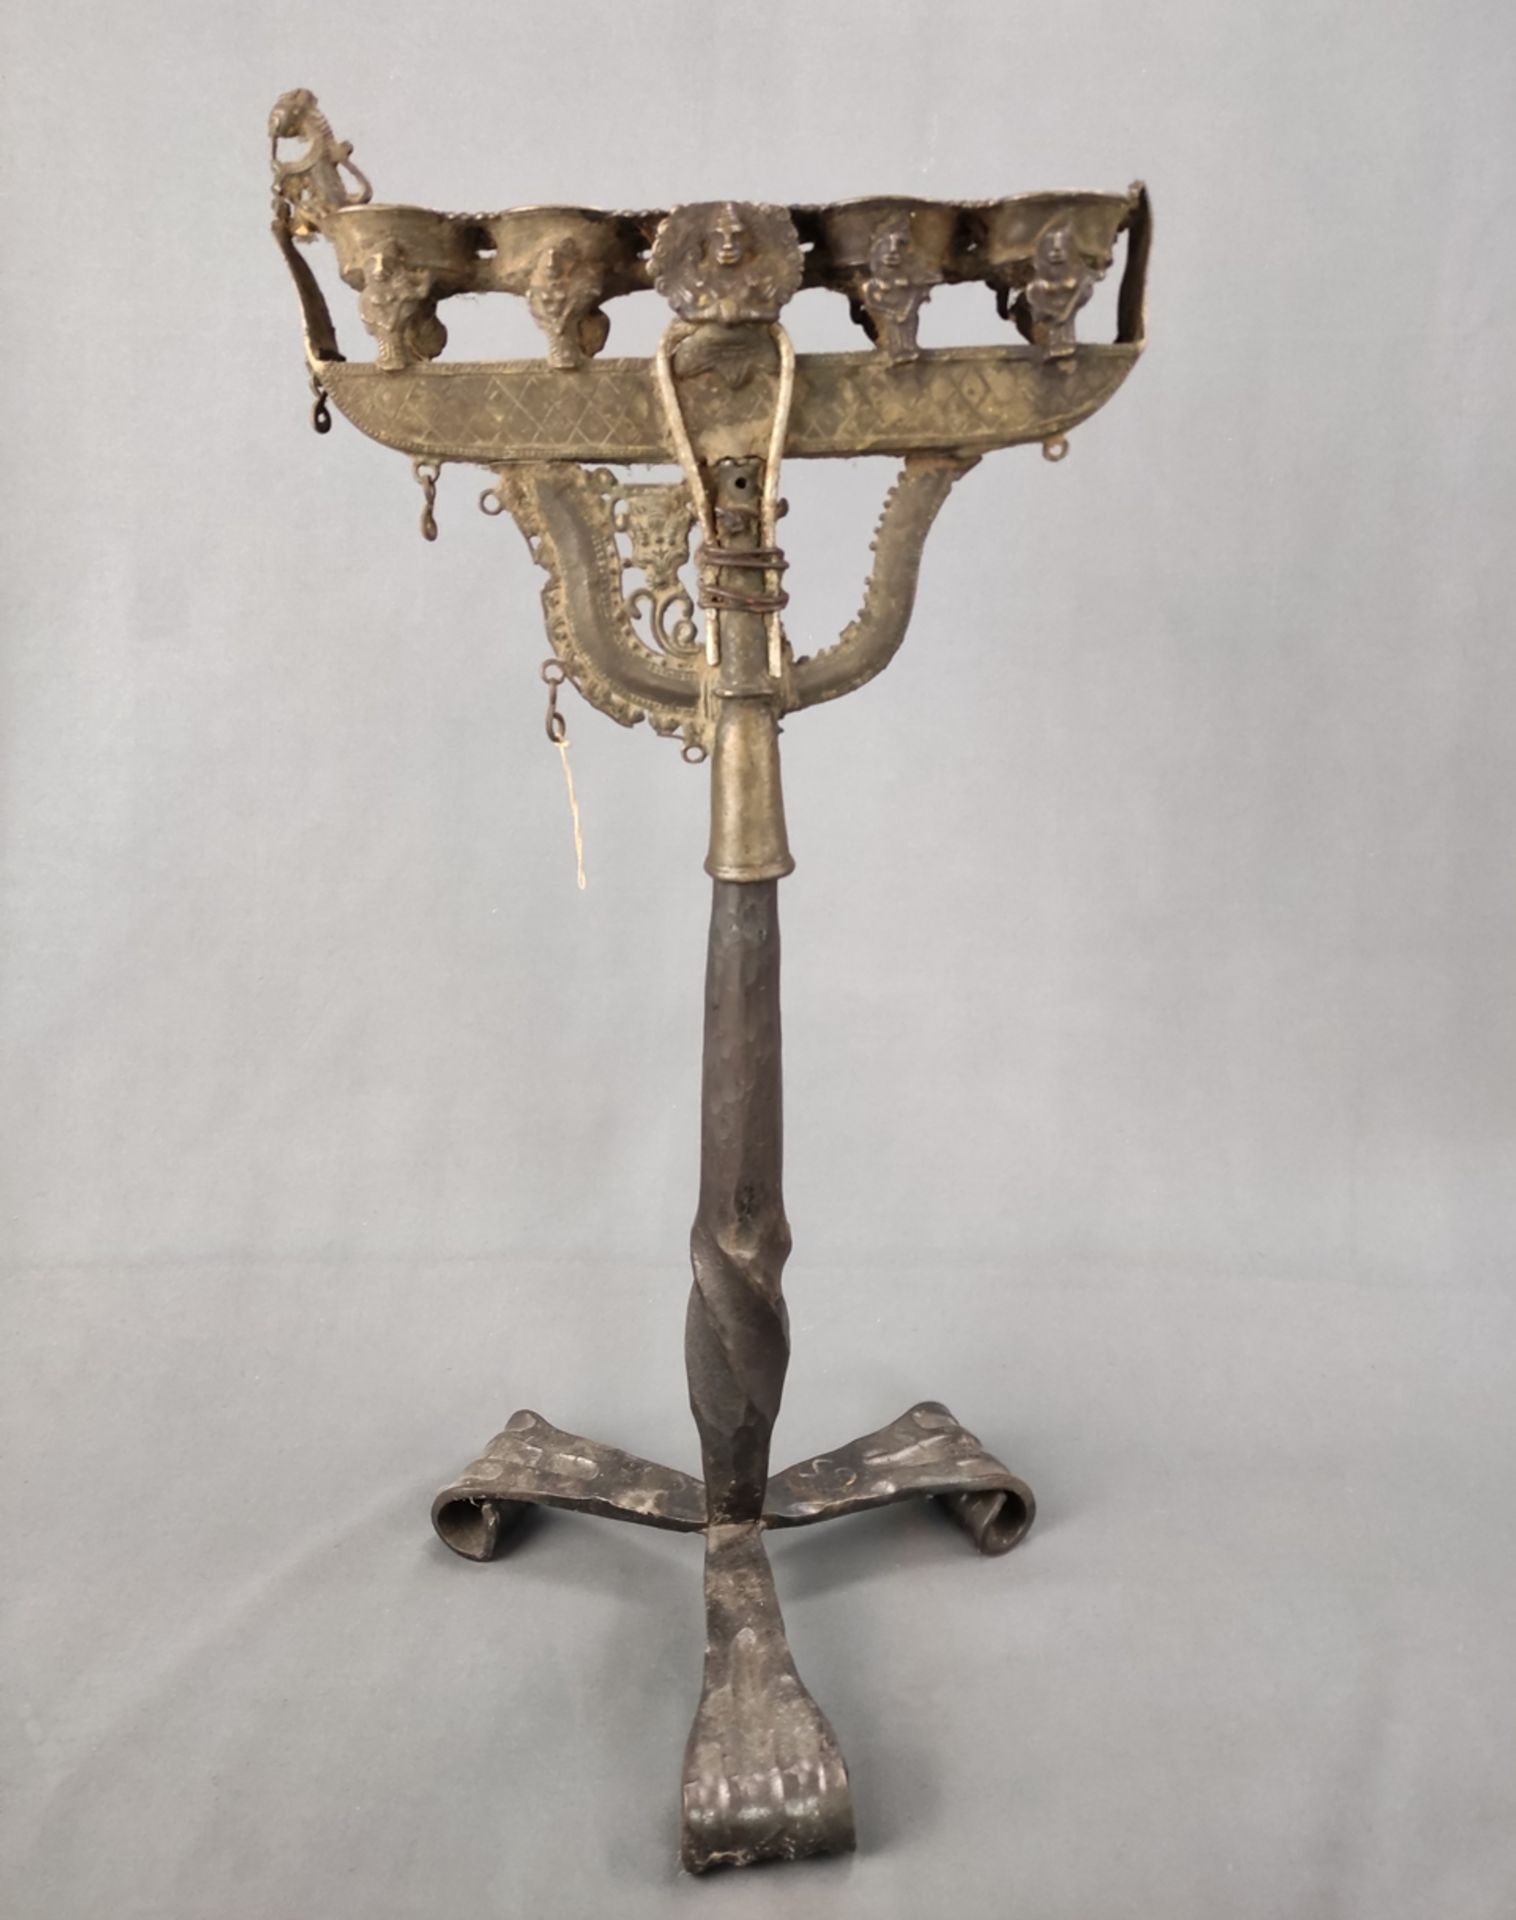 Antique oil candlestick, joined in two parts (not belonging together), 5 flames, small bowls for oi